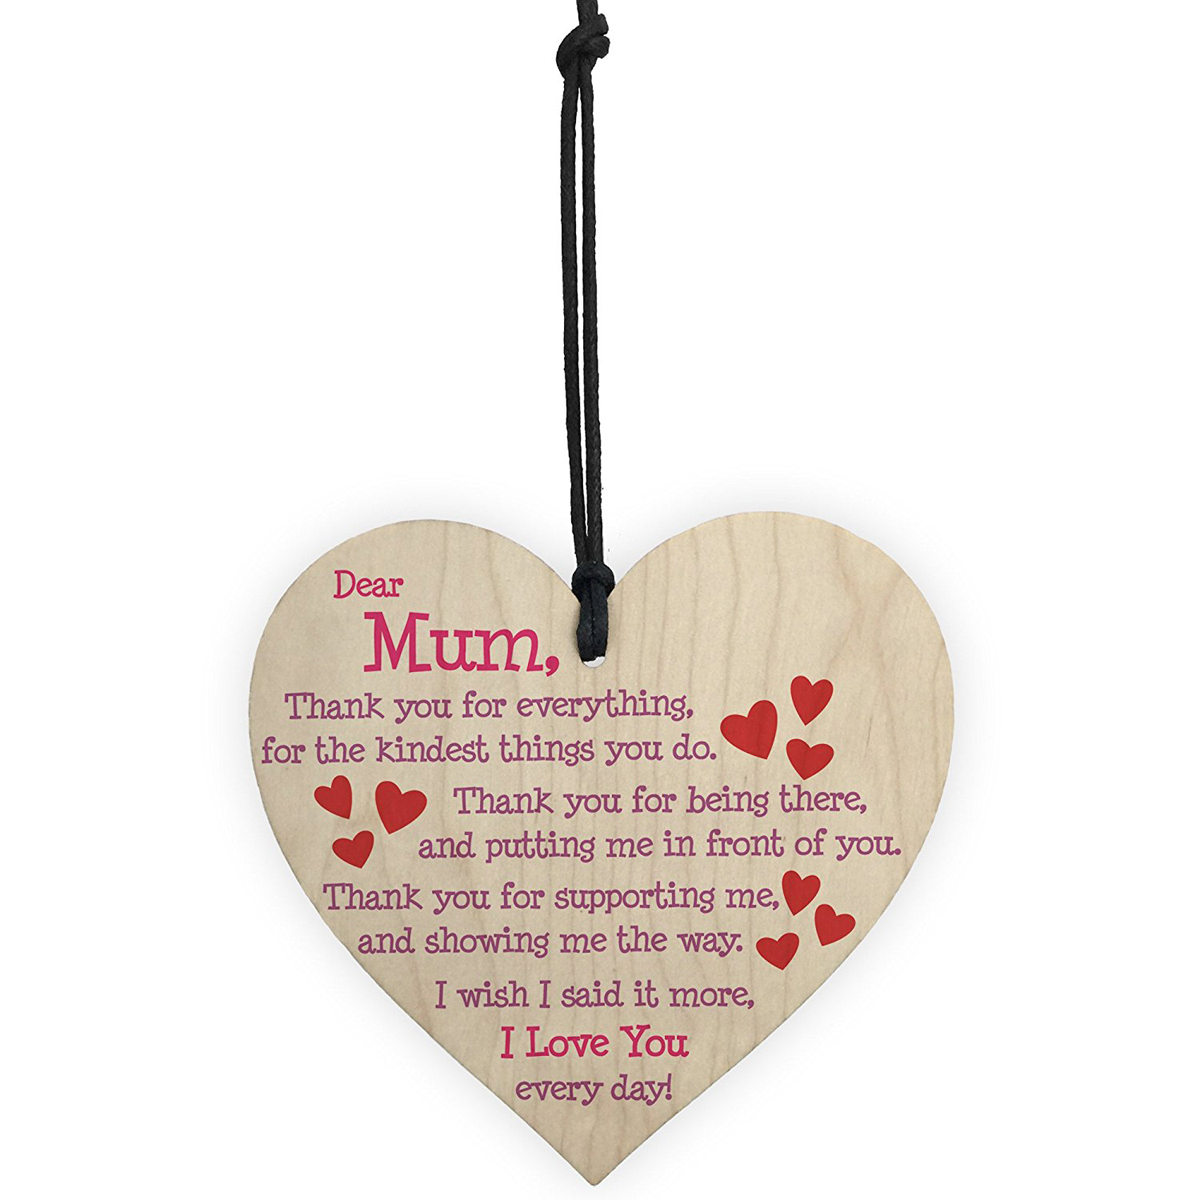 Wooden-Heart-Plaque-Funny-Rude-Mothers-Day-Heart-Gifts-Novelty-Daughter-Son-Decorations-1456823-3